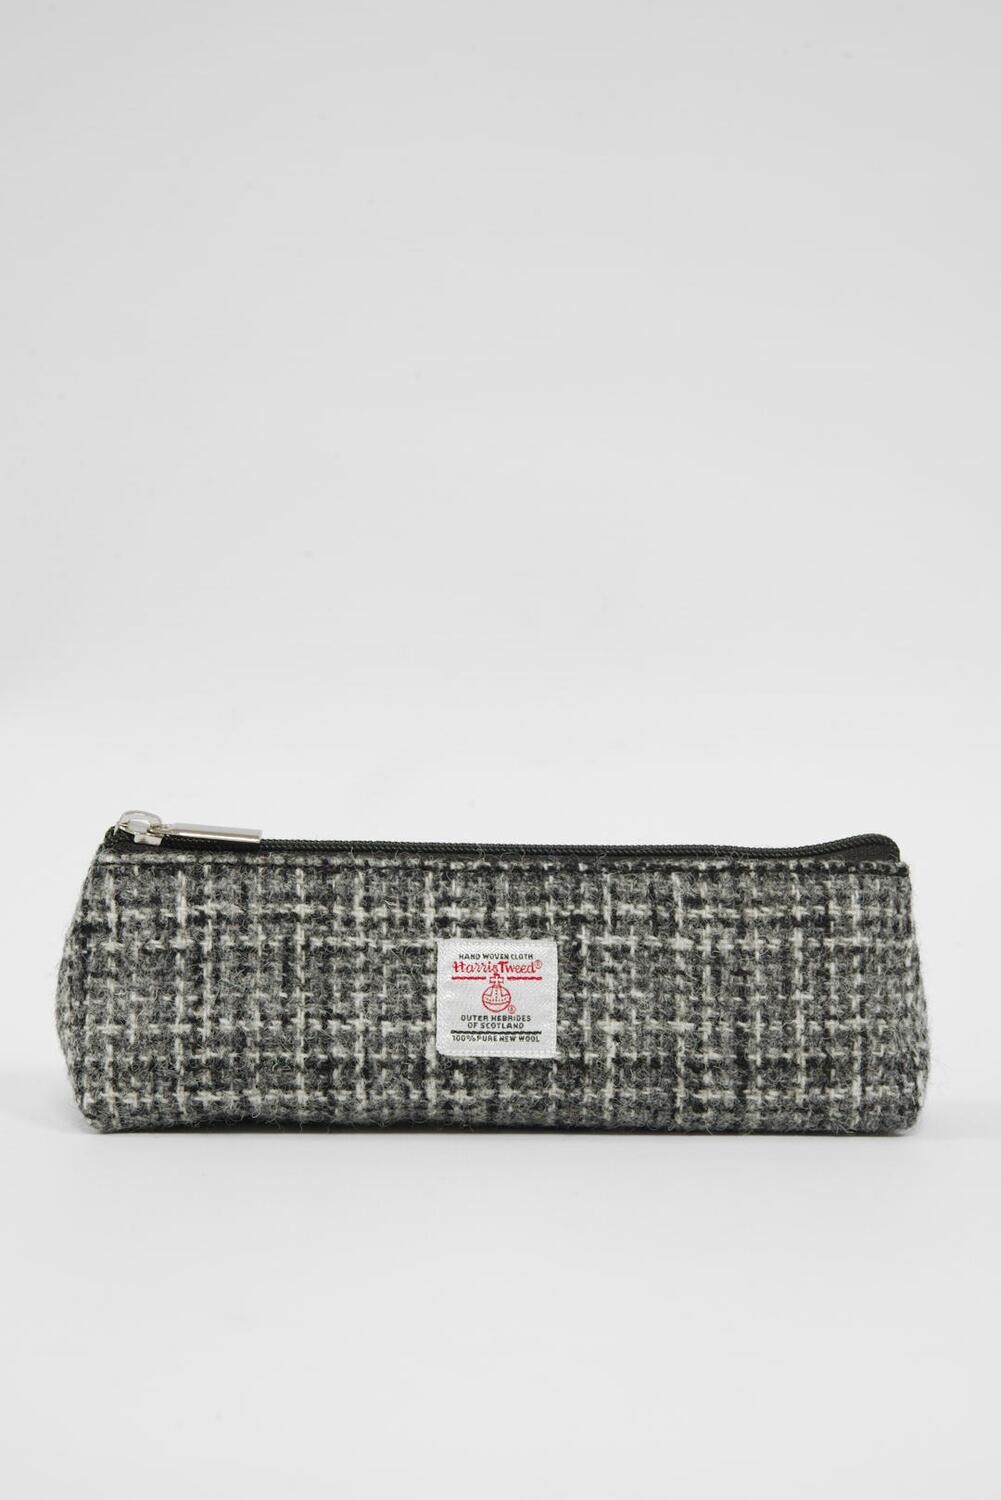 Books, Cards & Stationery :: Writing Accessories :: Weather Range Harris  Tweed® Slim Pencil Case